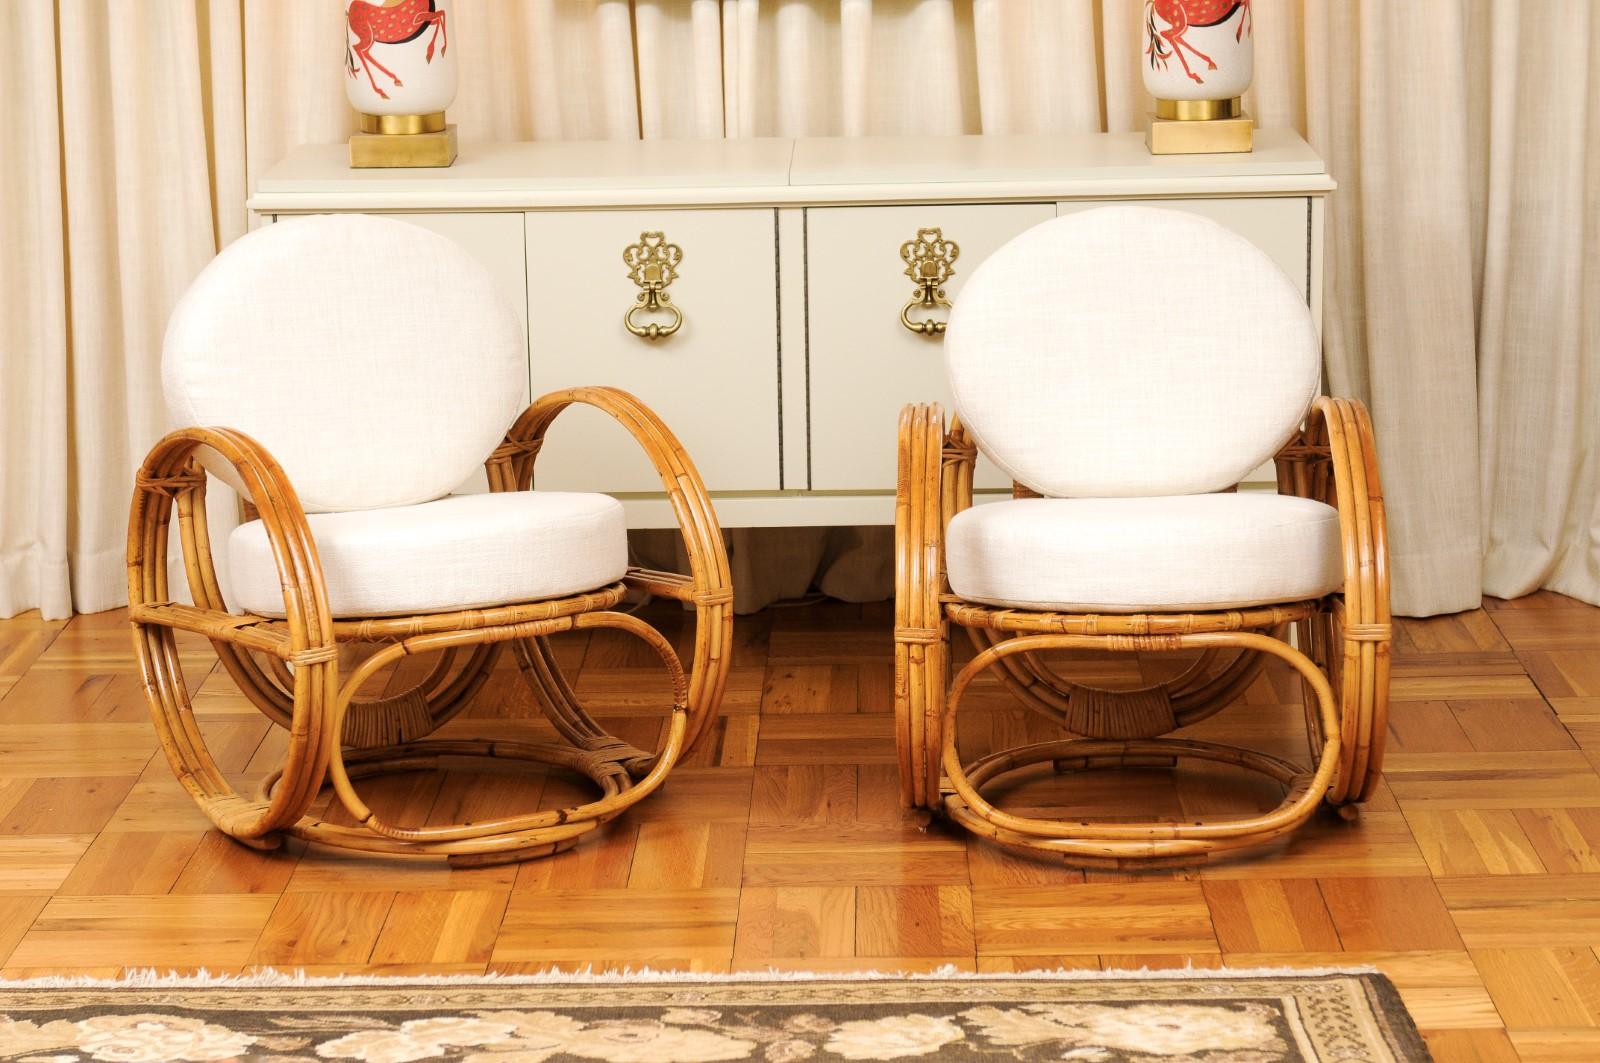 These magnificent lounge chairs are shipped as professionally photographed and described in the listing narrative: Meticulously professionally restored, upholstered and ready to enjoy. Expert custom upholstery service is available.

A fabulous